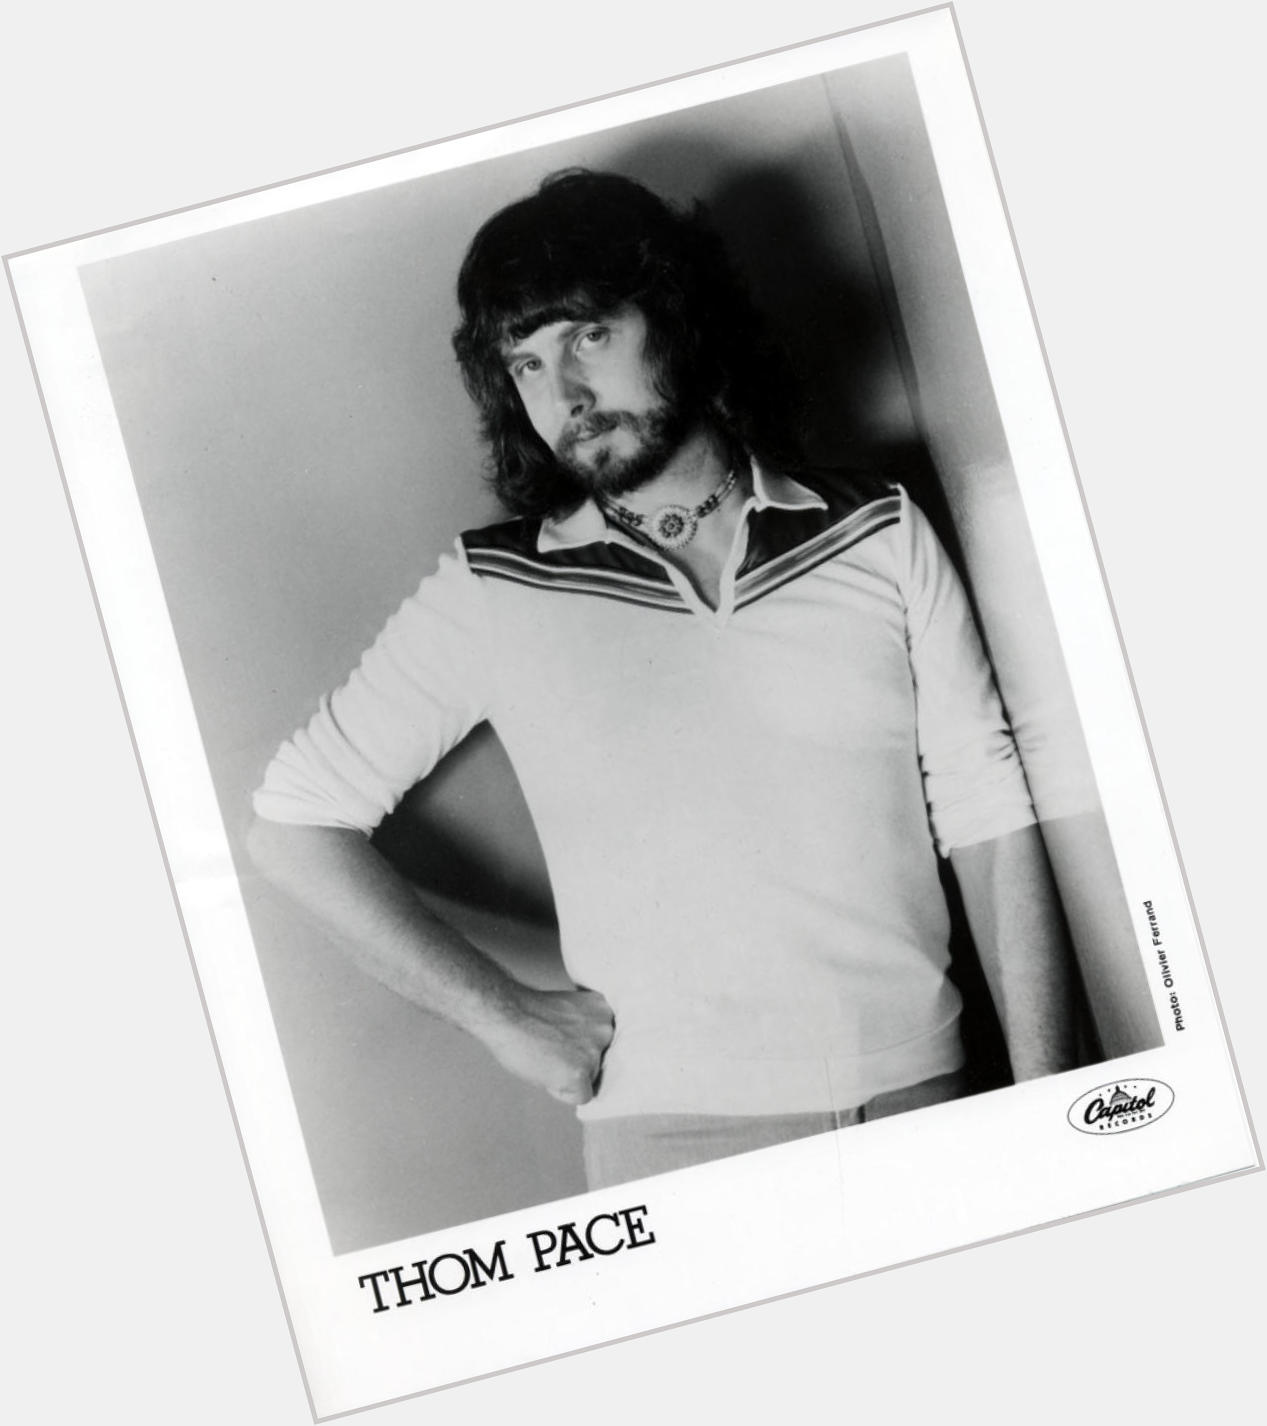 Thom Pace  